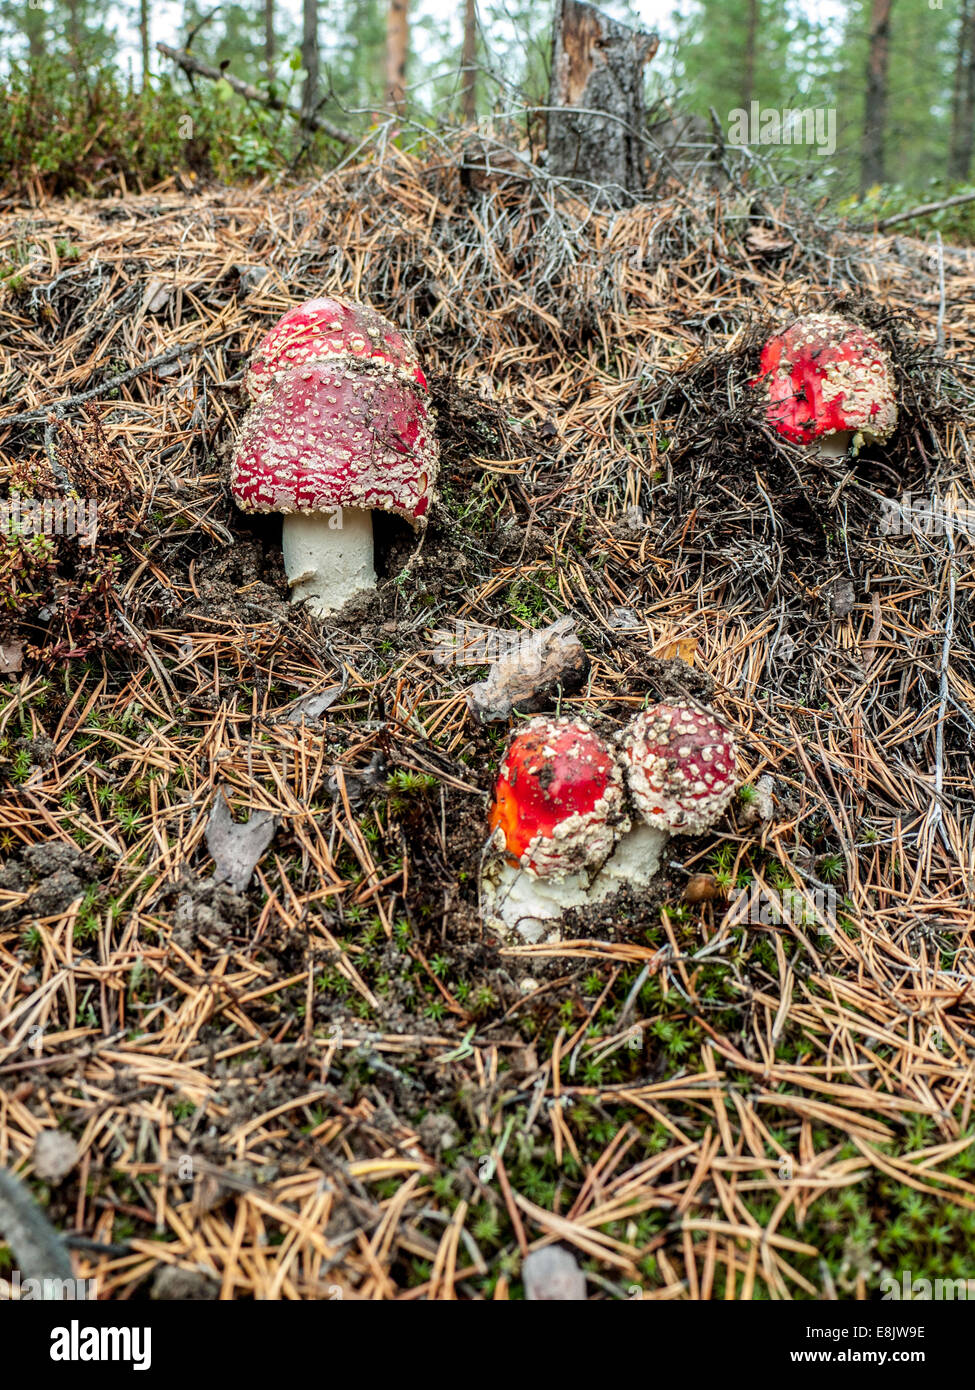 Group of fly agaric mushrooms growing among conifer needles Stock Photo